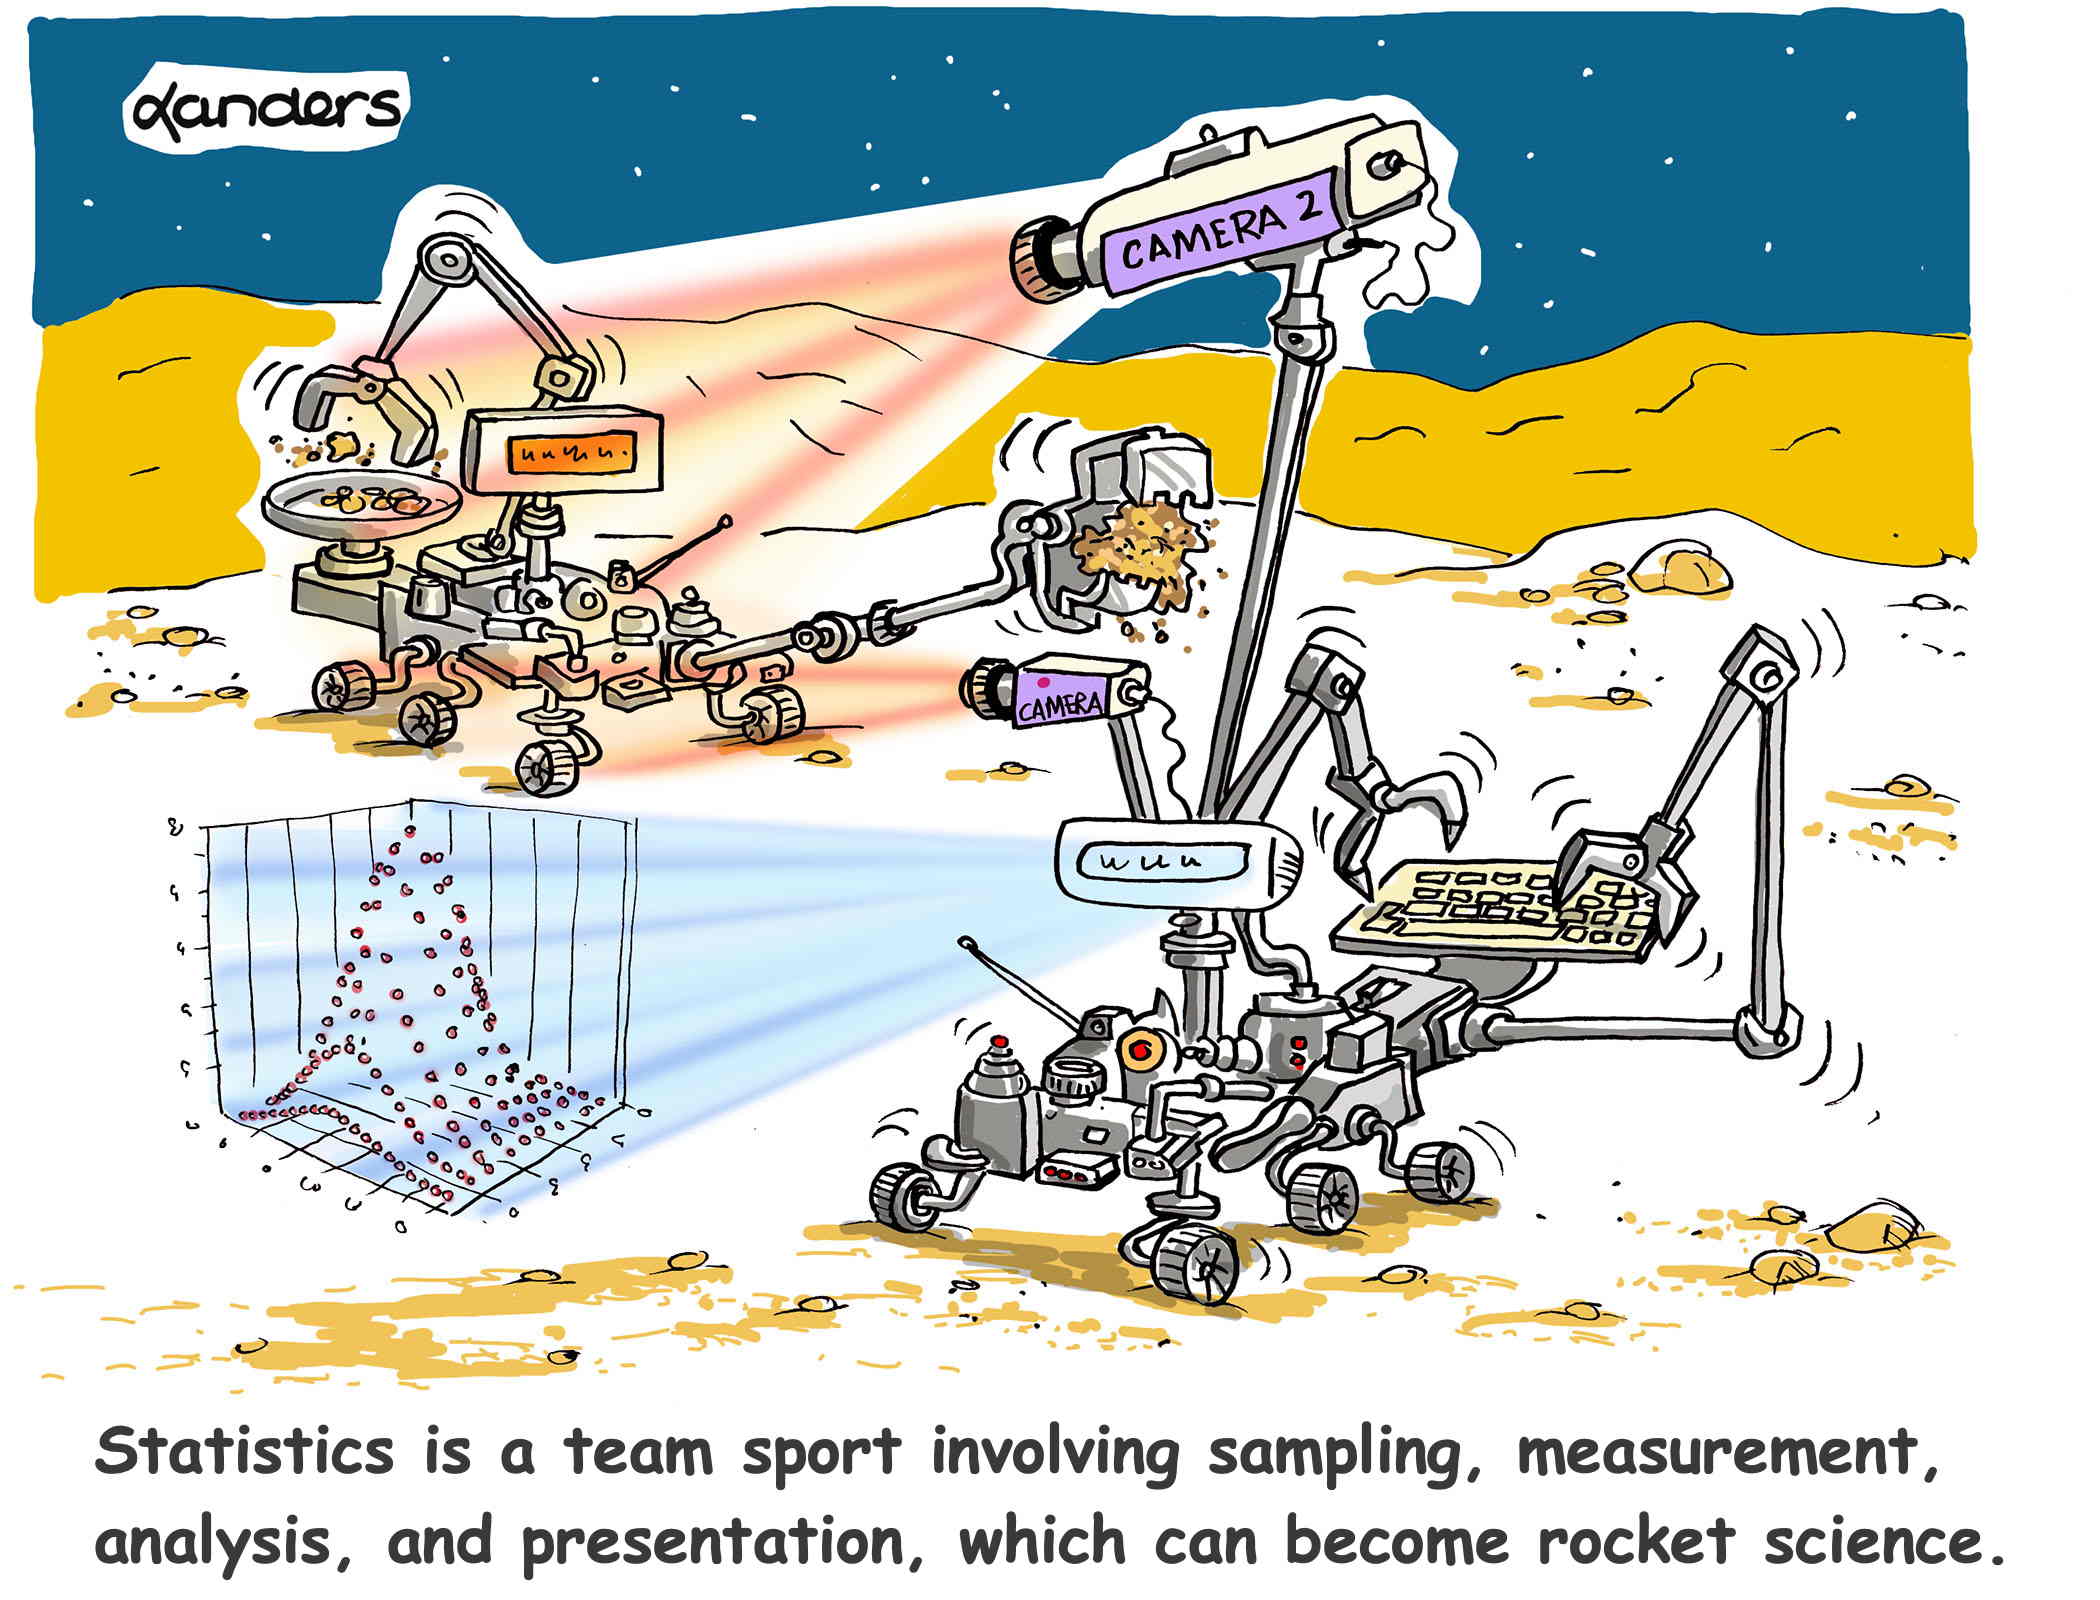 cartoon with two robots on a planet gathering data. Caption says: "danders CAMERA 2 W d e E CAMERA 혼율품통 0_ Statistics is a team sport involving sampling, measurement, analysis, and presentation, which can become rocket science."